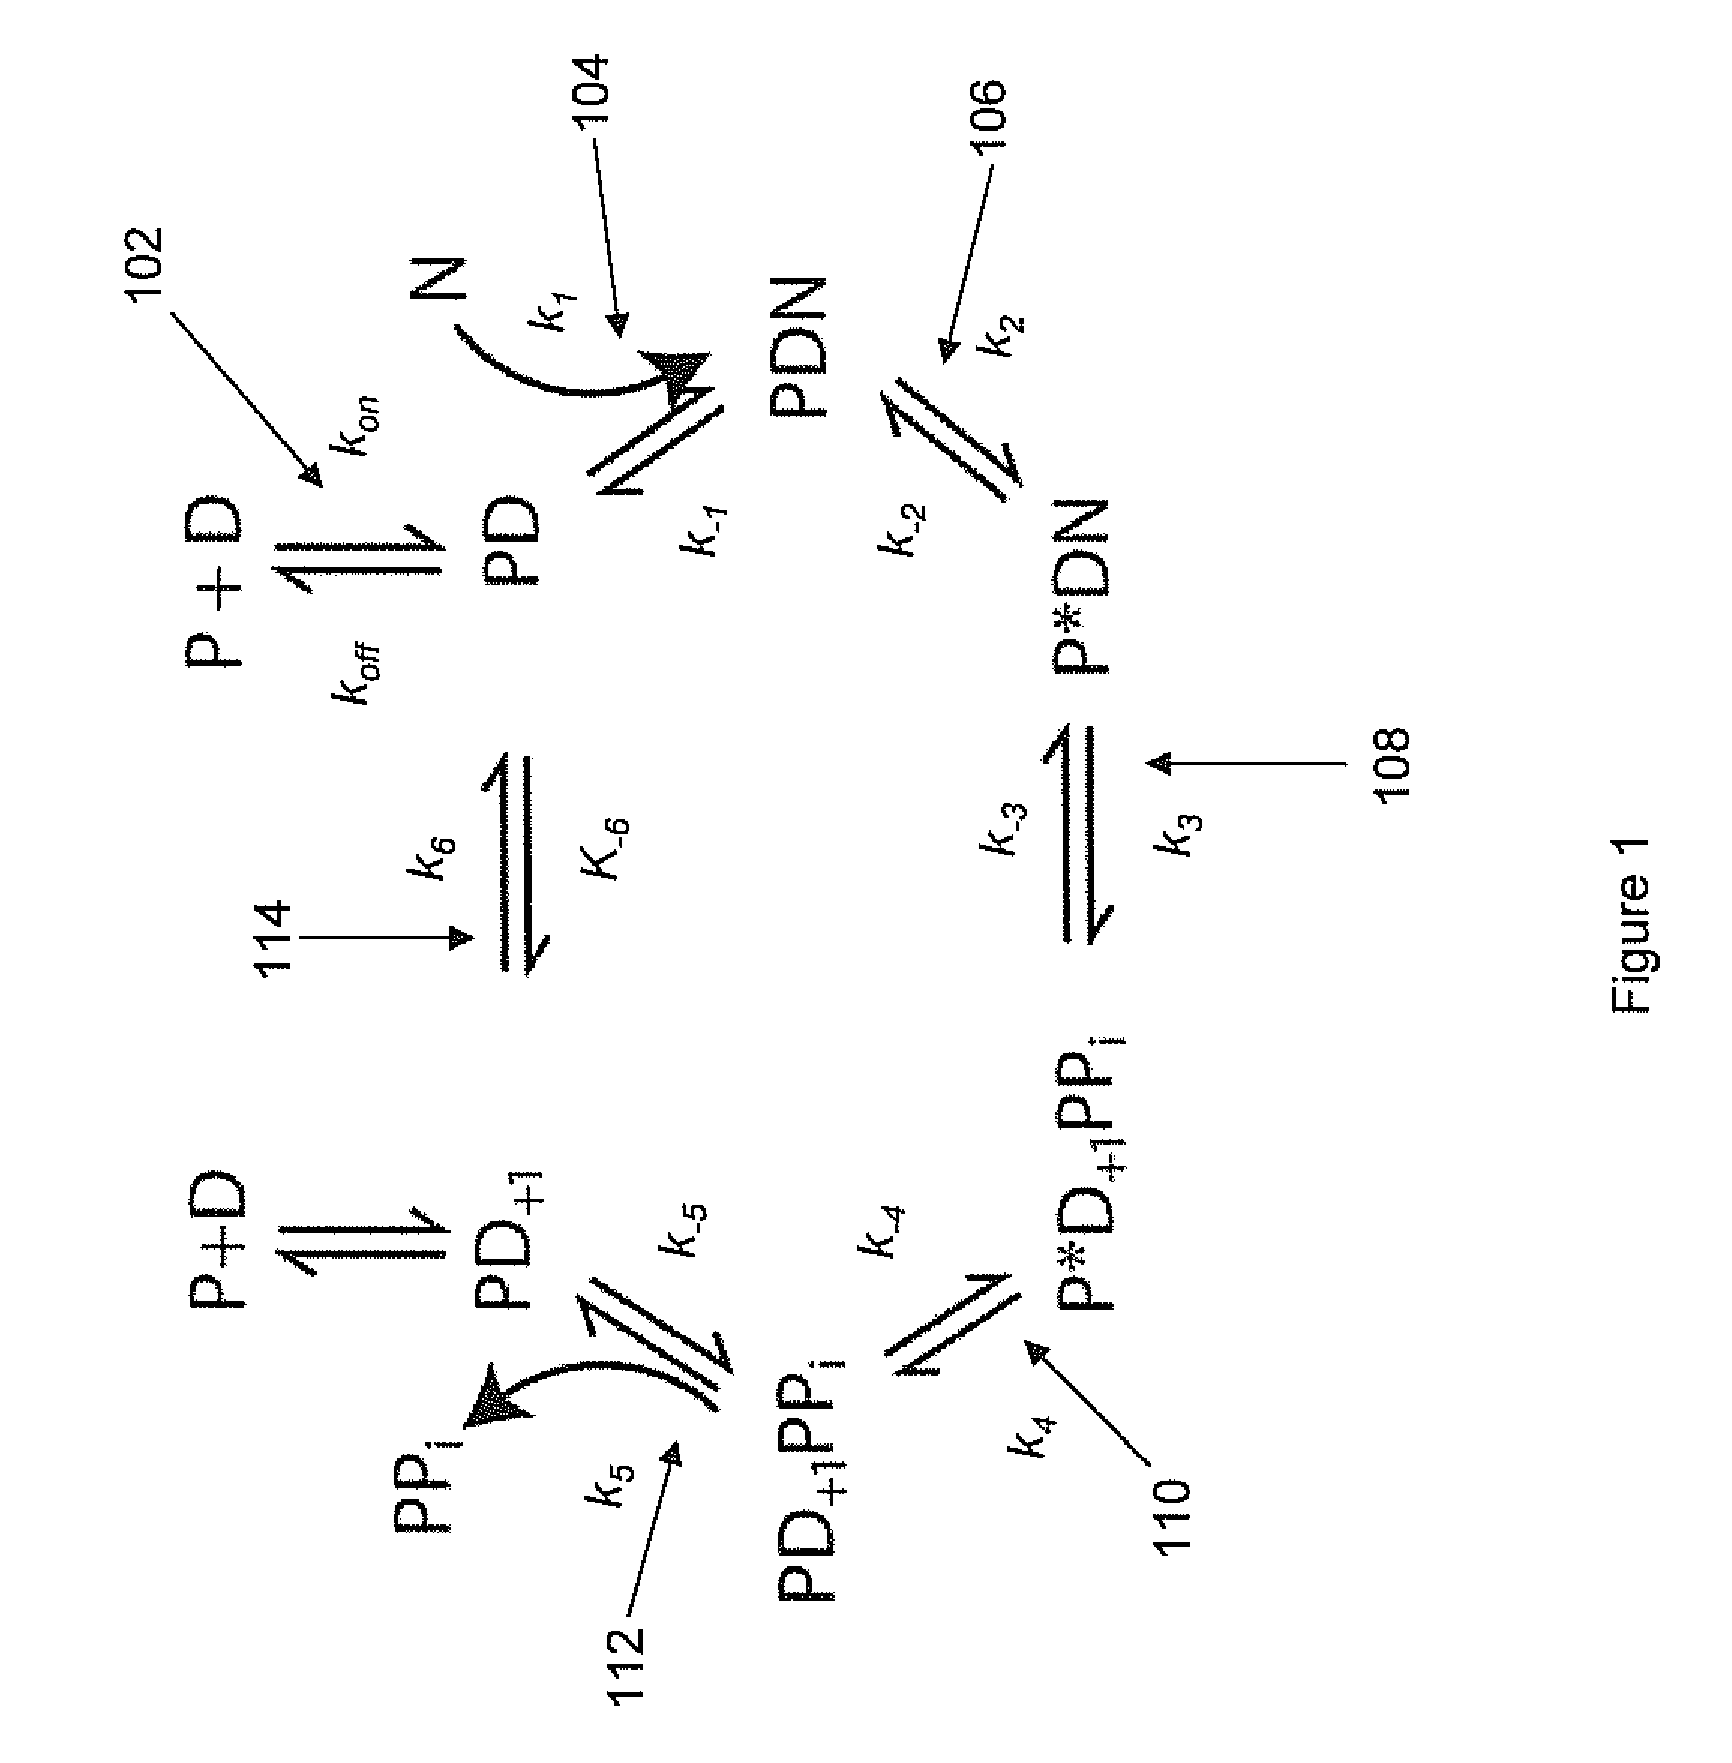 Two slow-step polymerase enzyme systems and methods